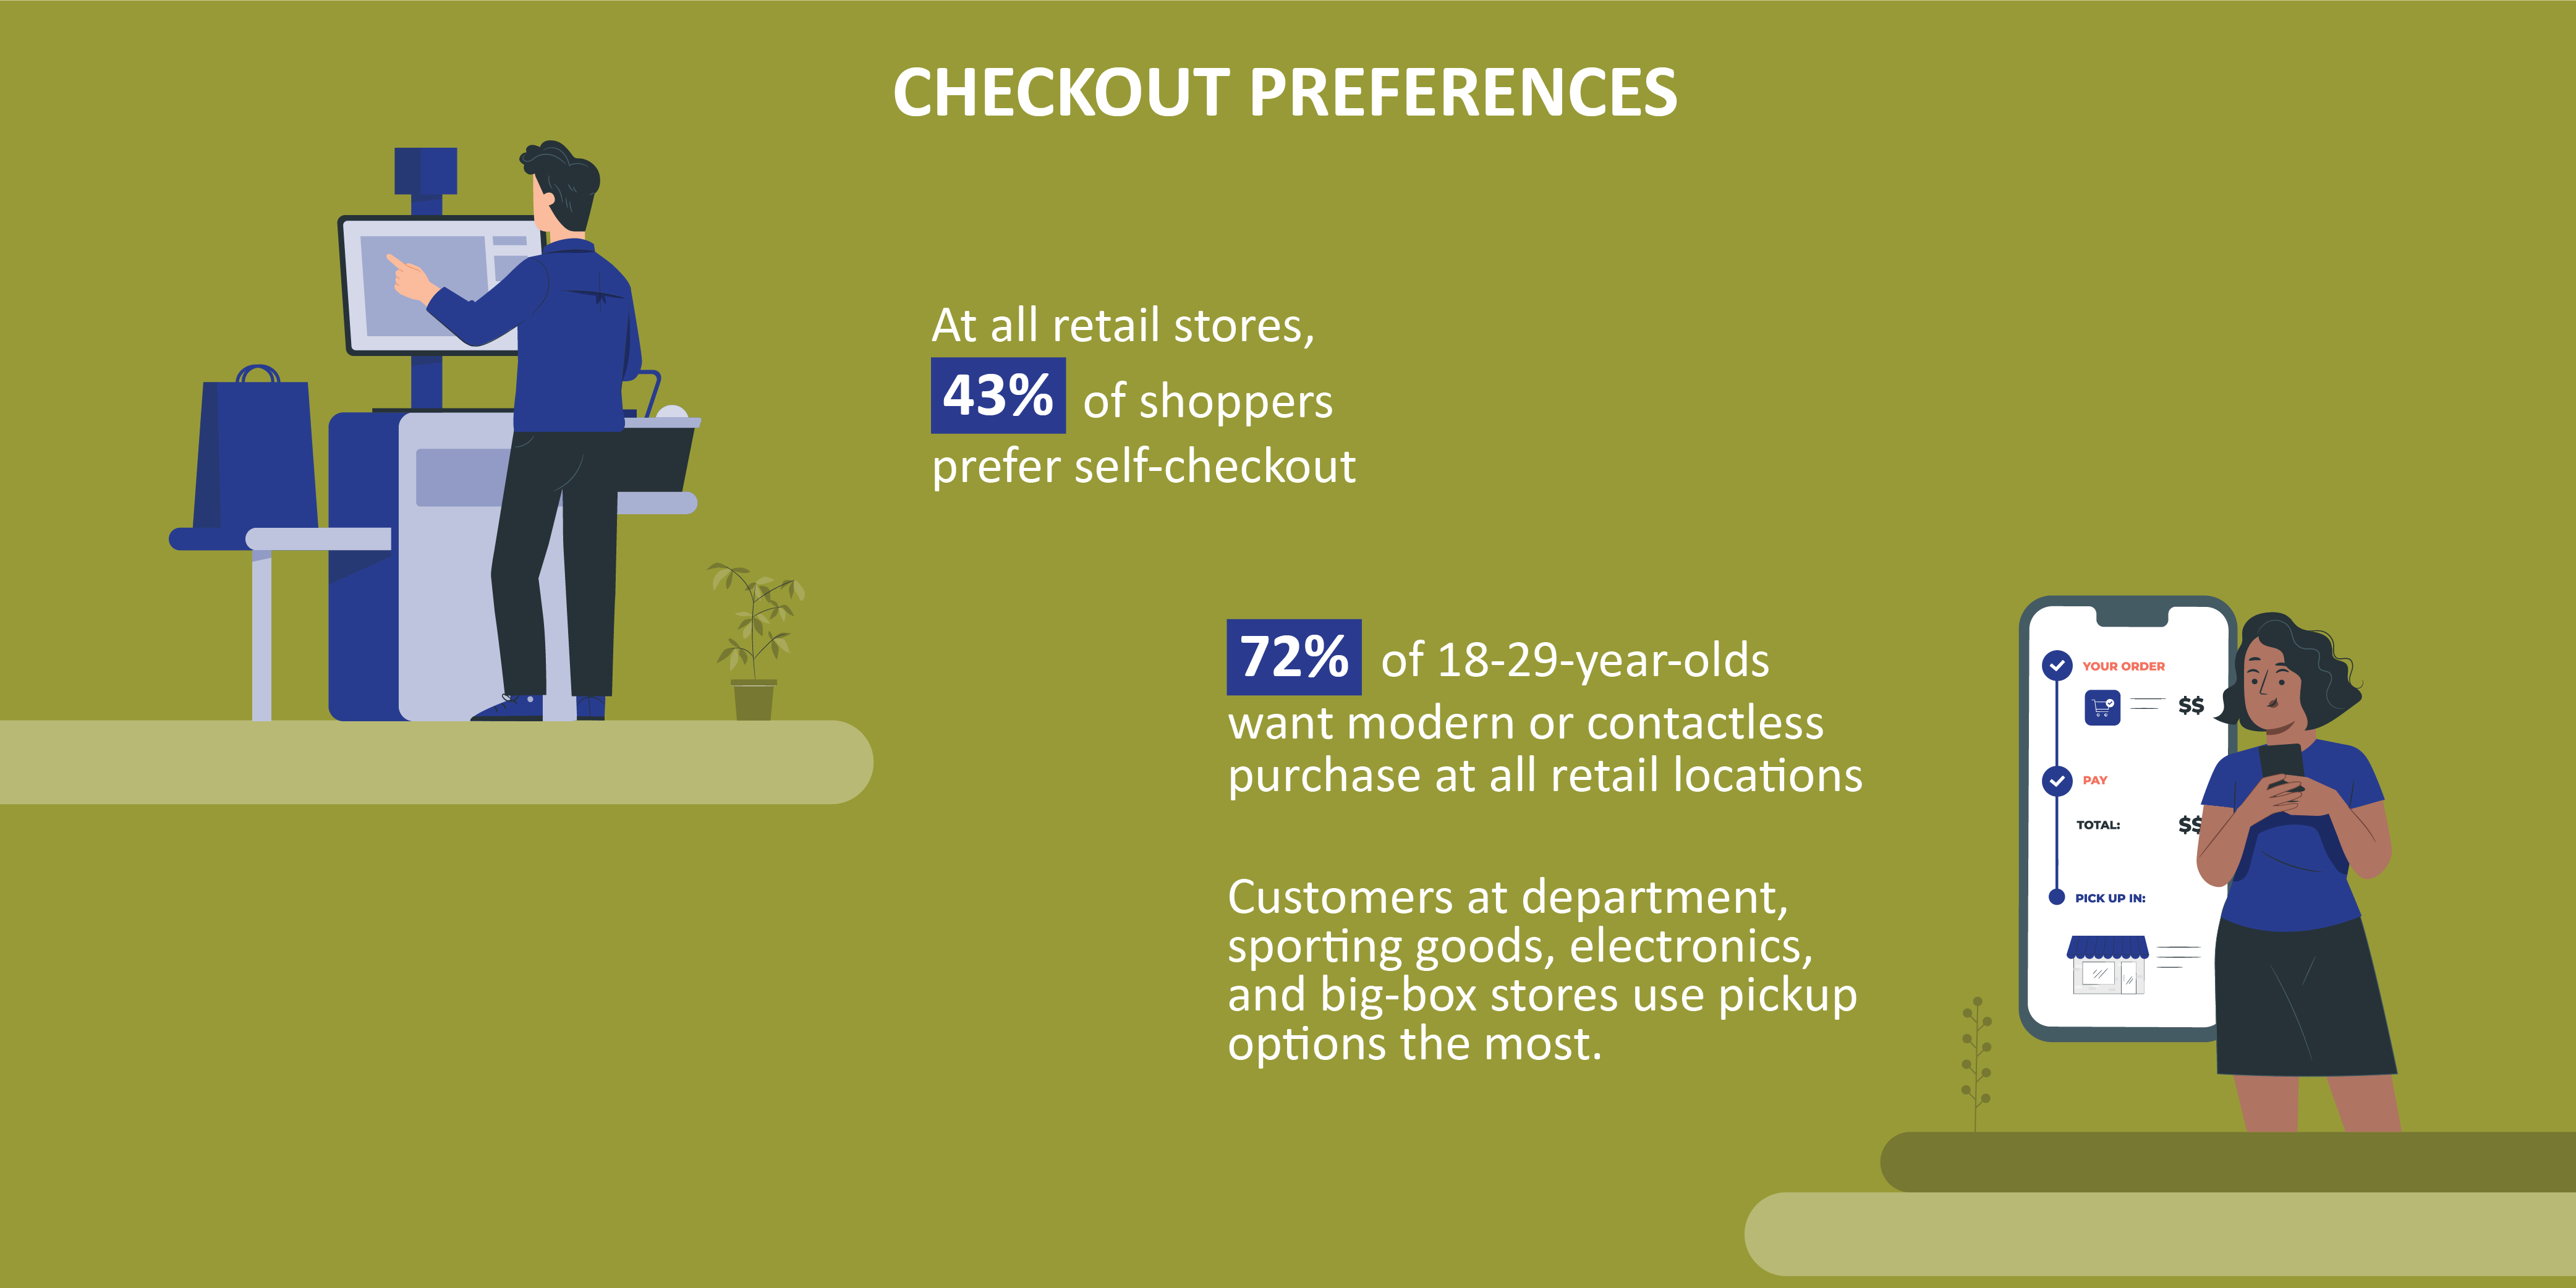 Modern, contactless checkout options are used by 72% of shoppers aged 18-29